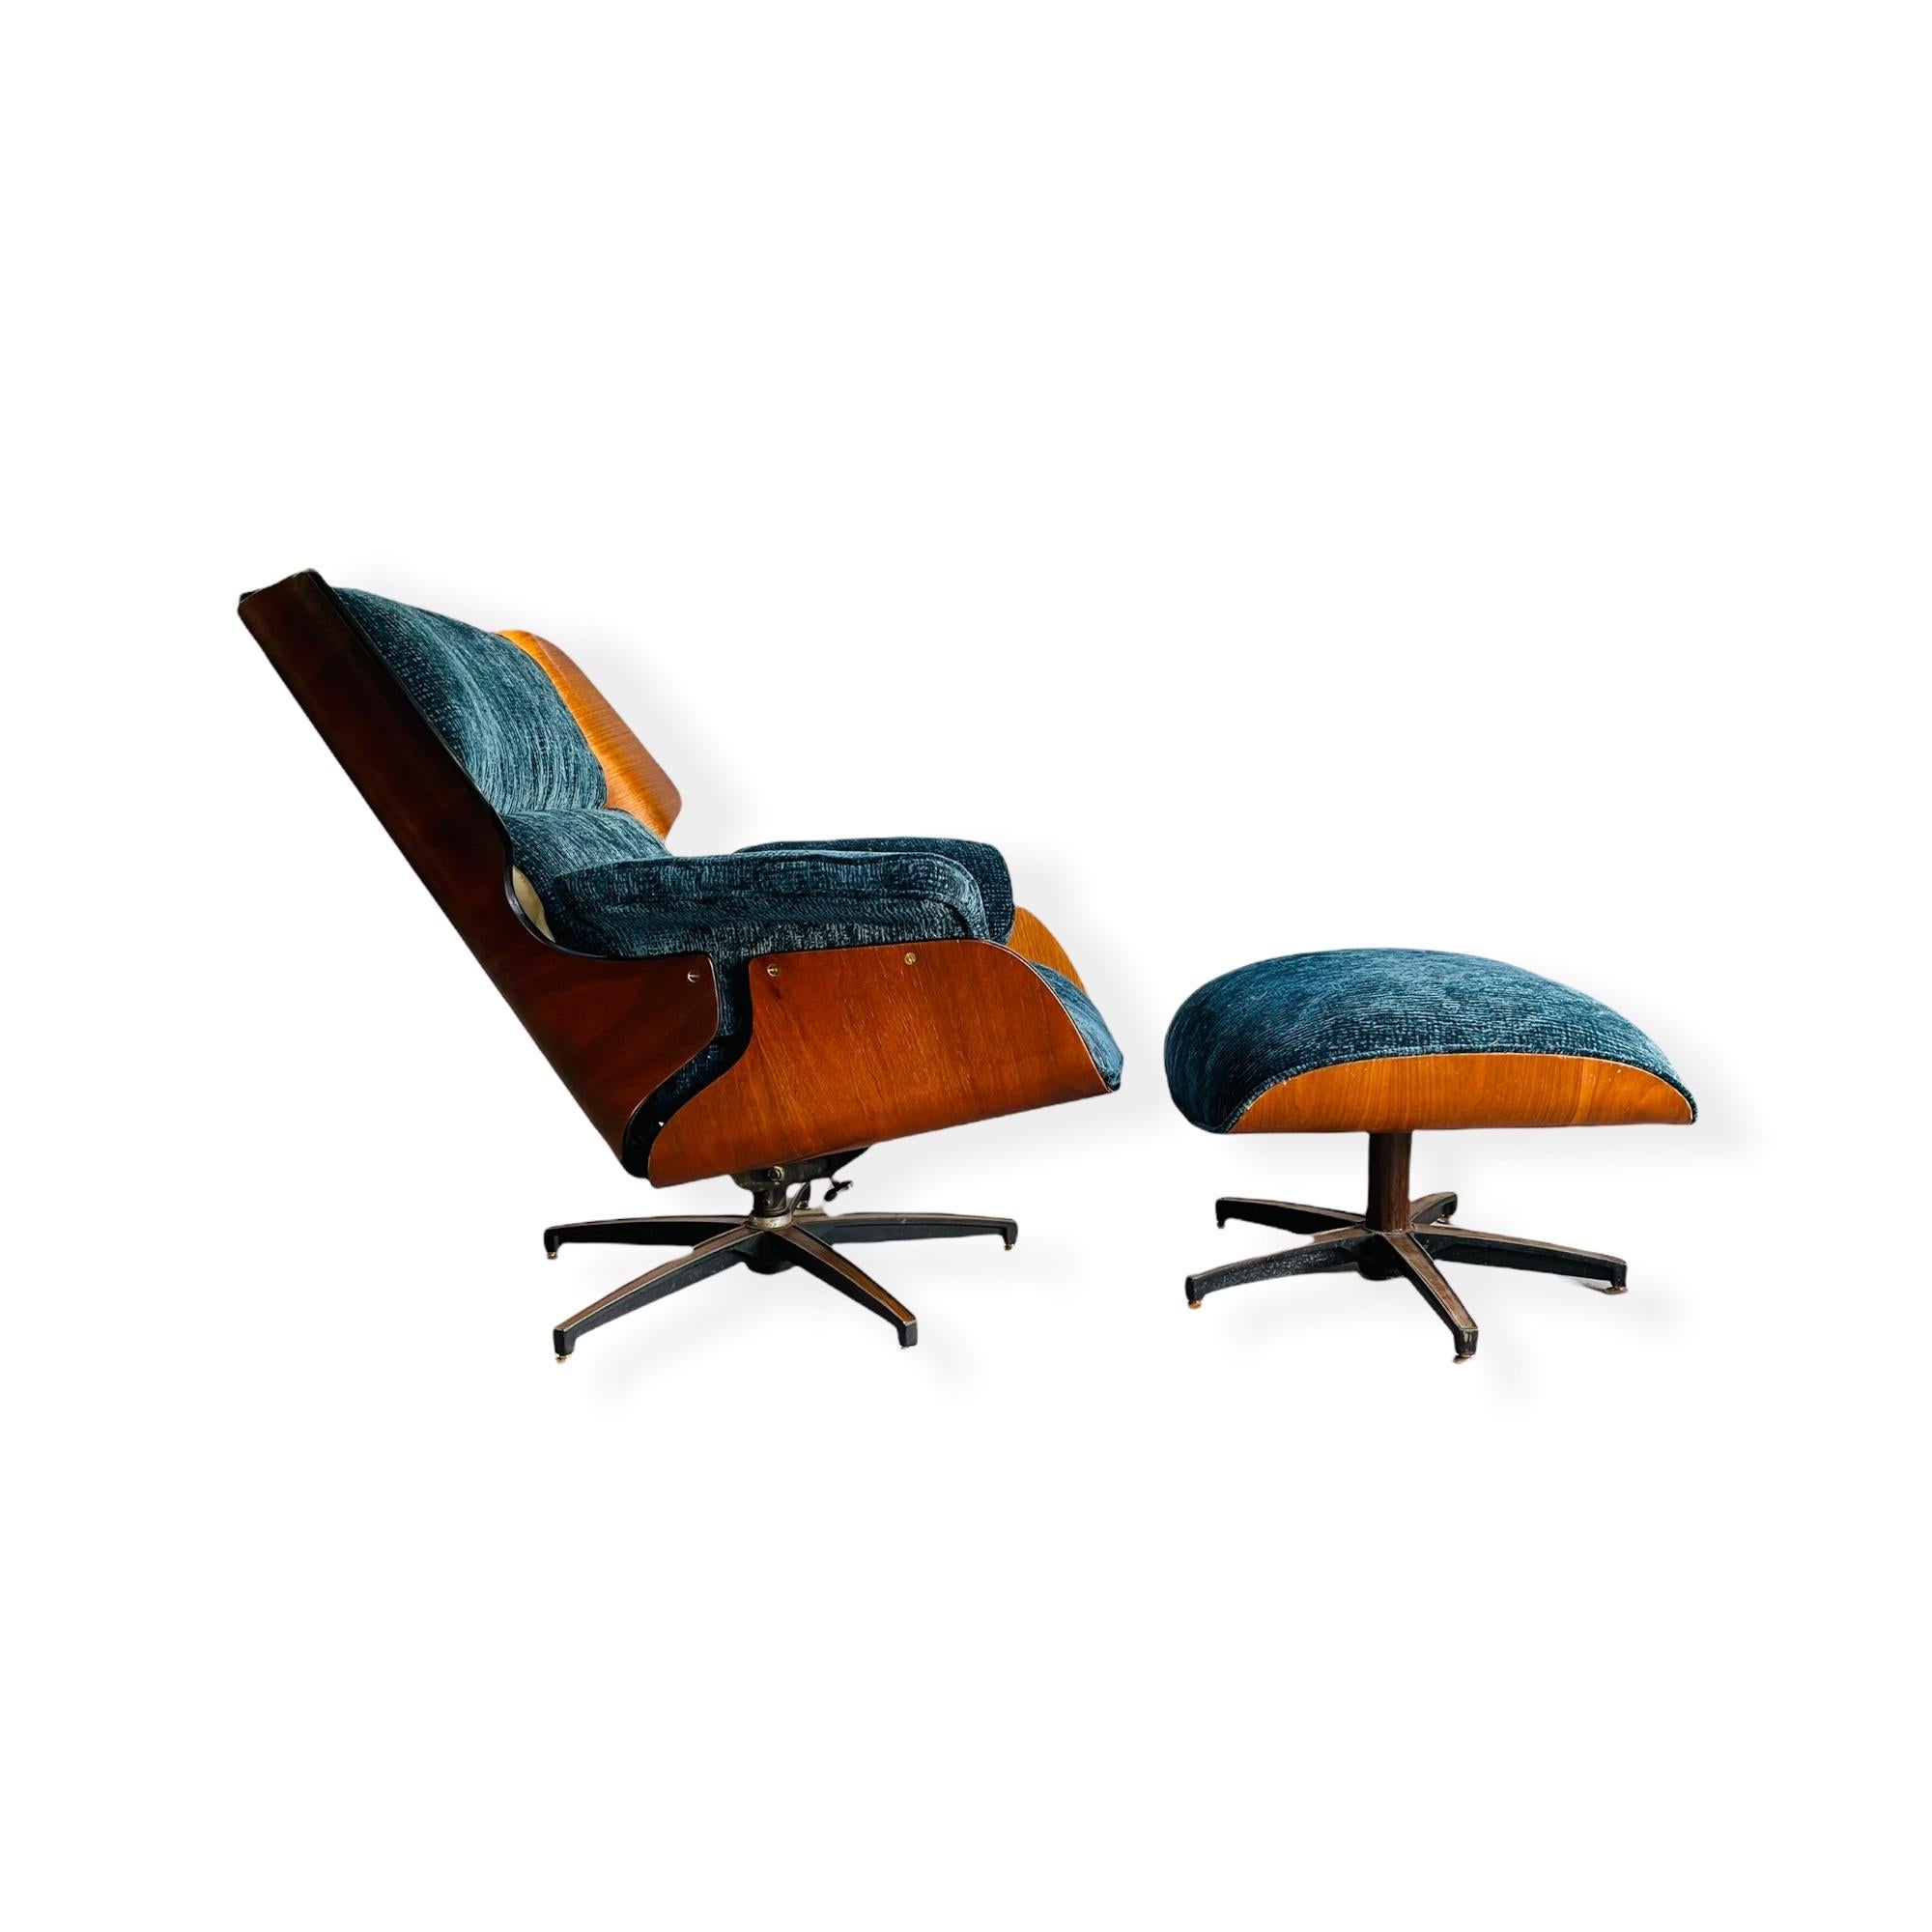 Here is a beautiful Mid-Century Modern Drexel Declaration swiveling lounge chair and ottoman designed by Kipp Stewart & Stewart McDougall. This chair features a stunning bent plywood frame with walnut finish. The chair and the ottoman is fully